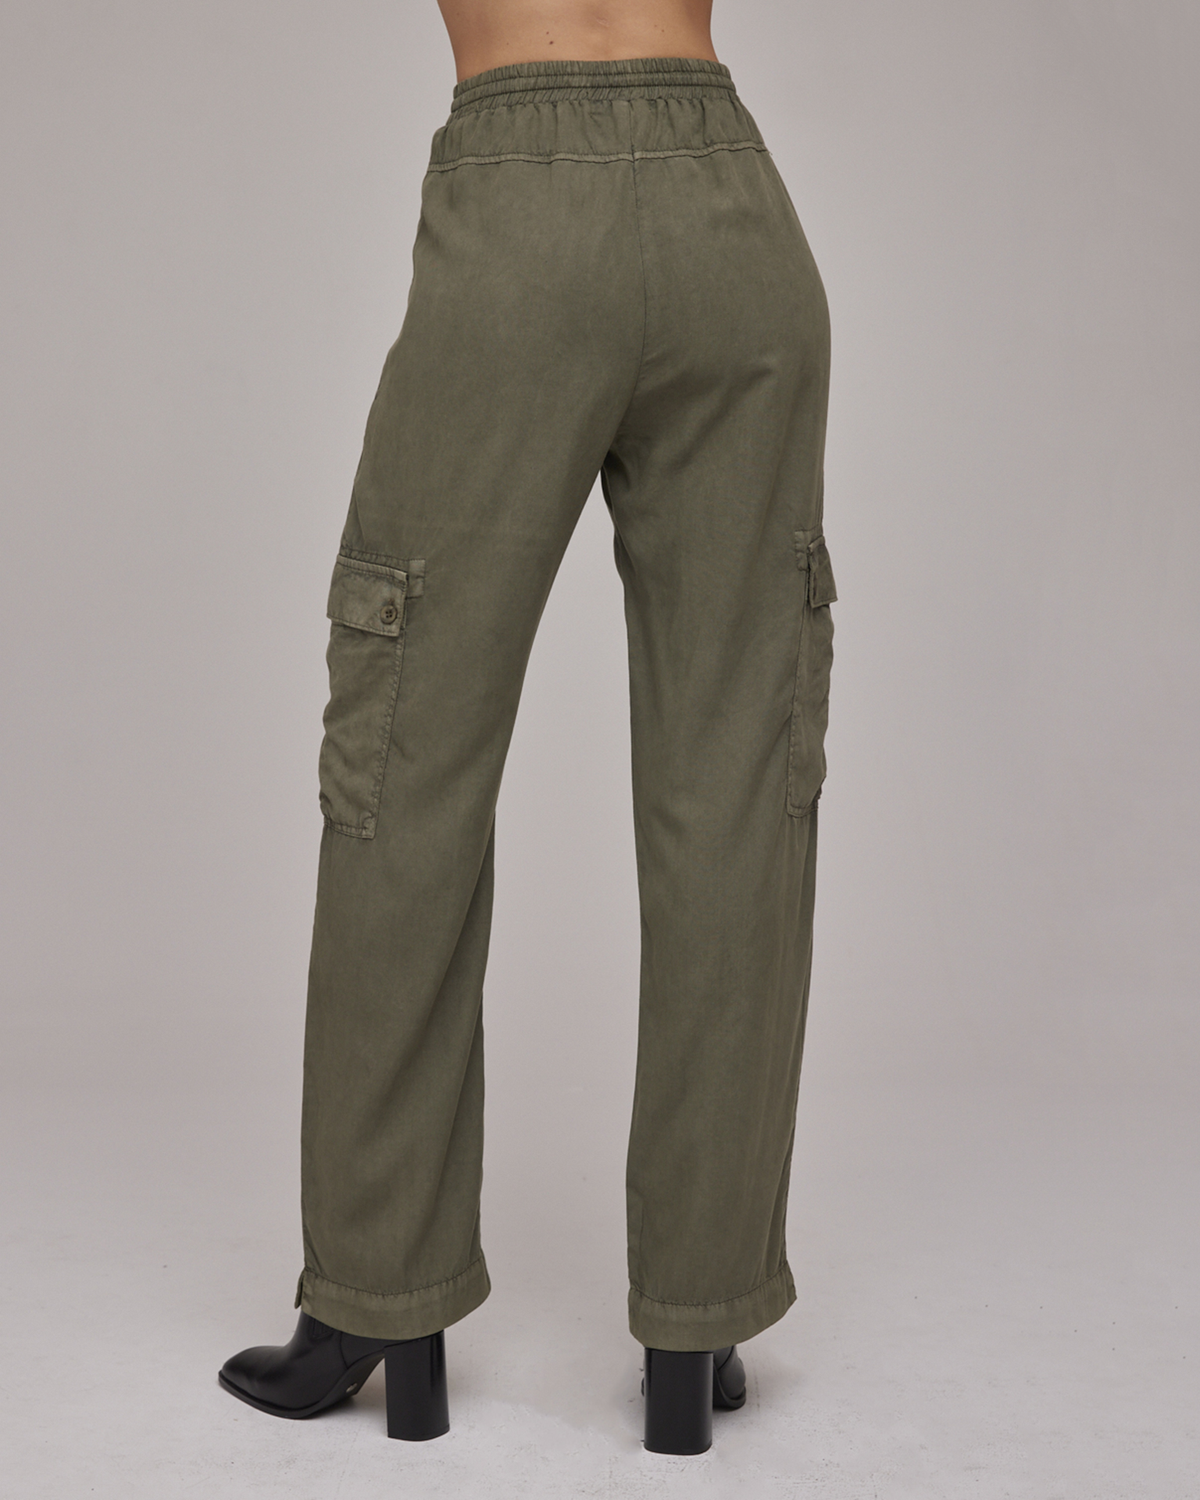 Cargo Pant in Herb Green